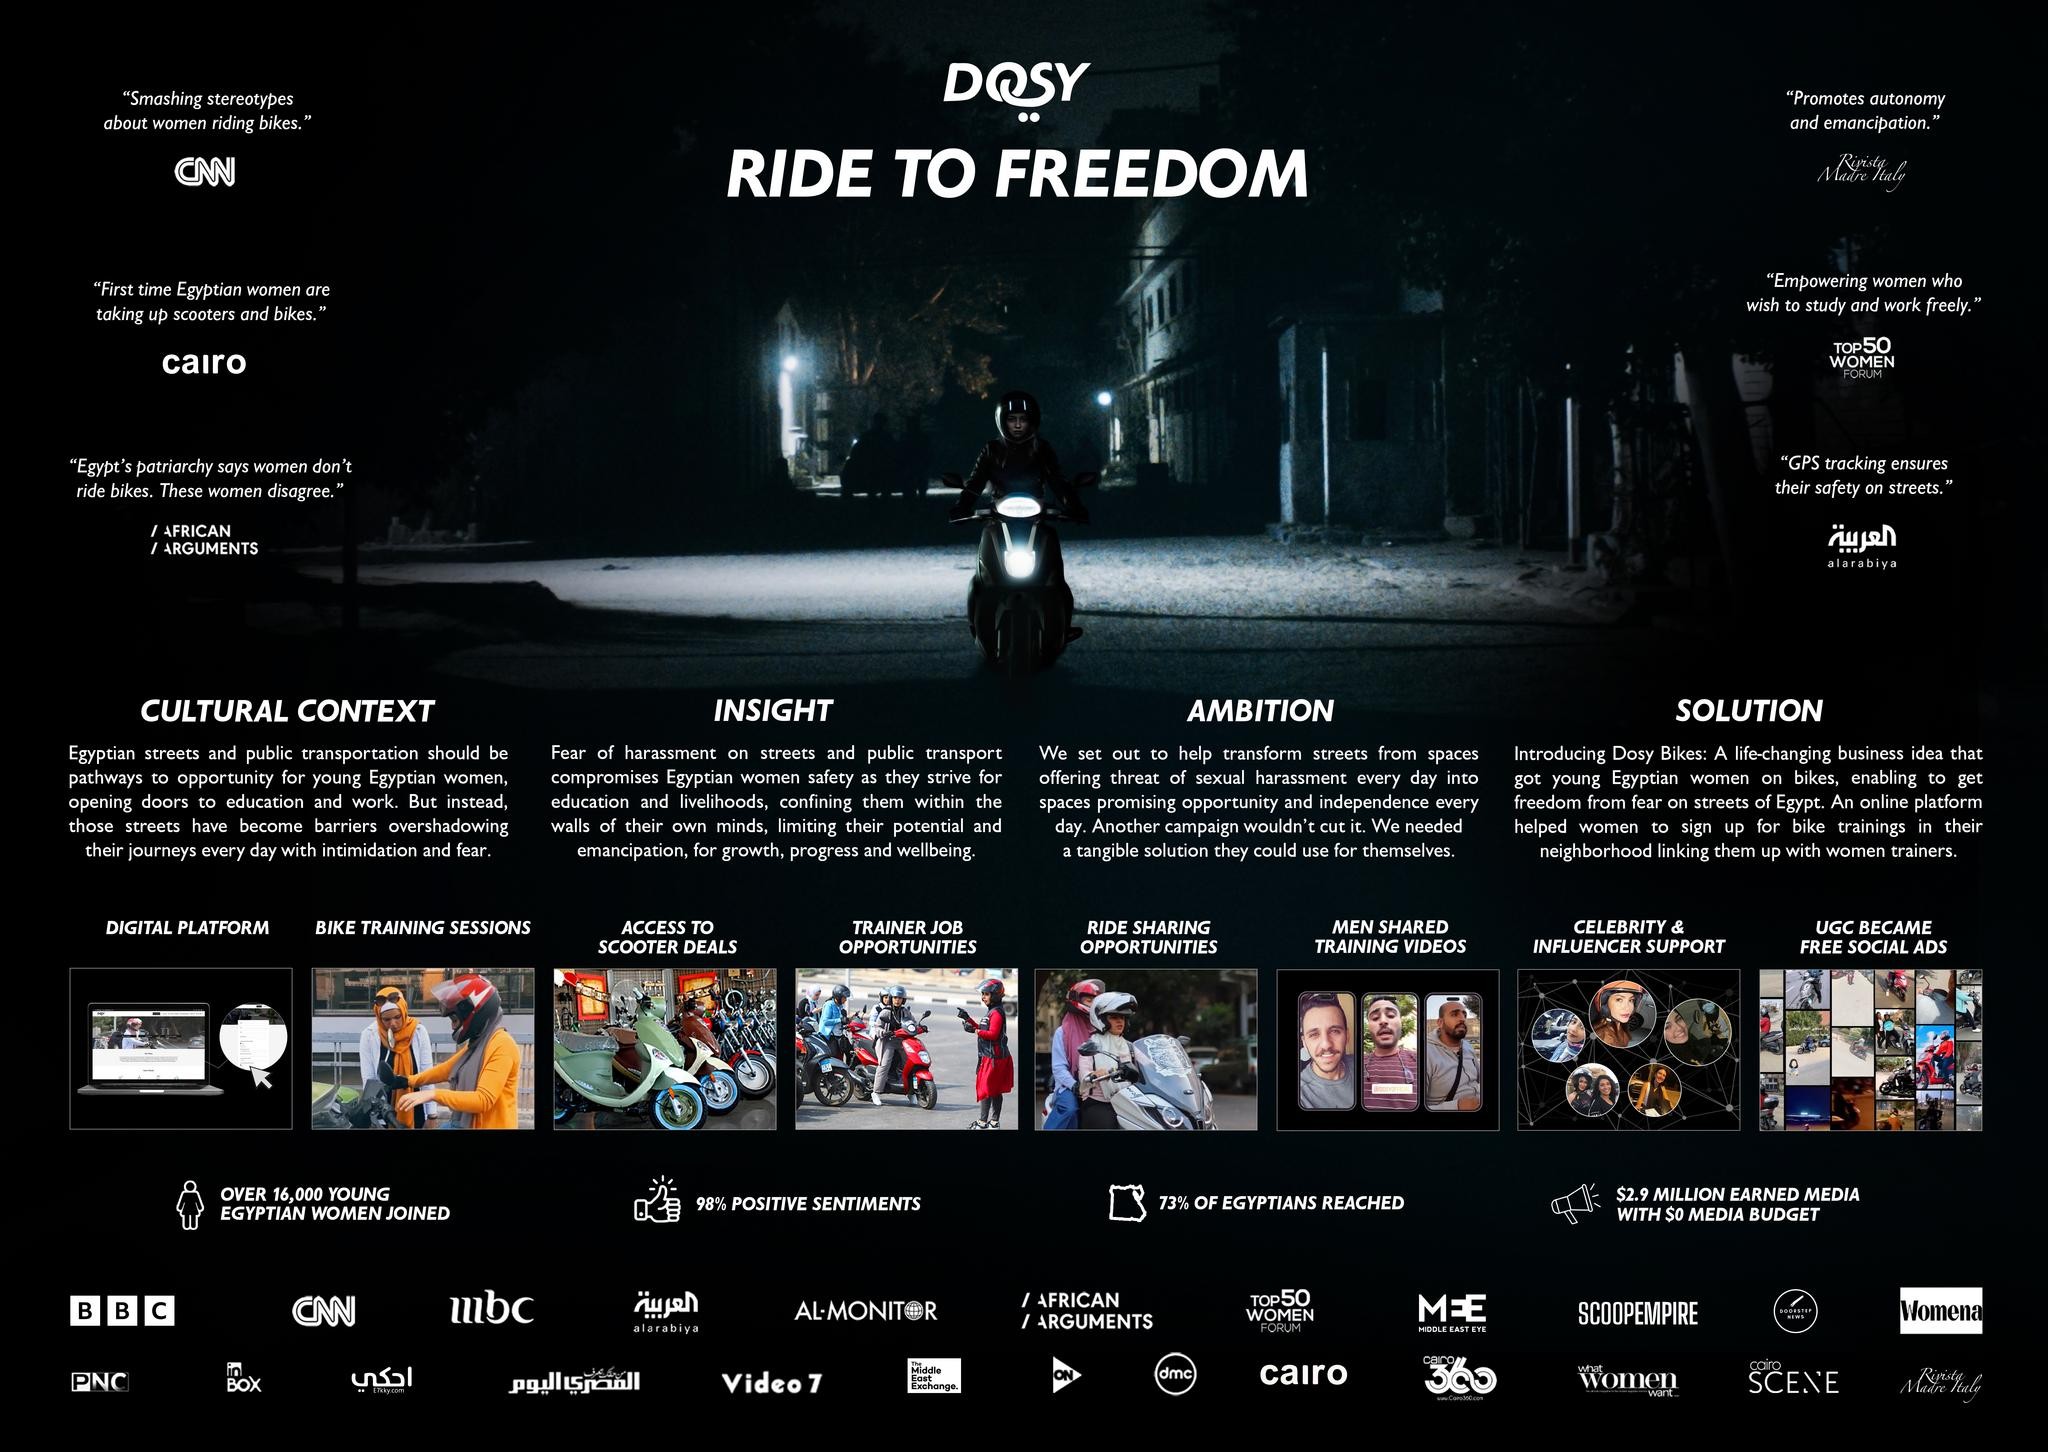 RIDE TO FREEDOM